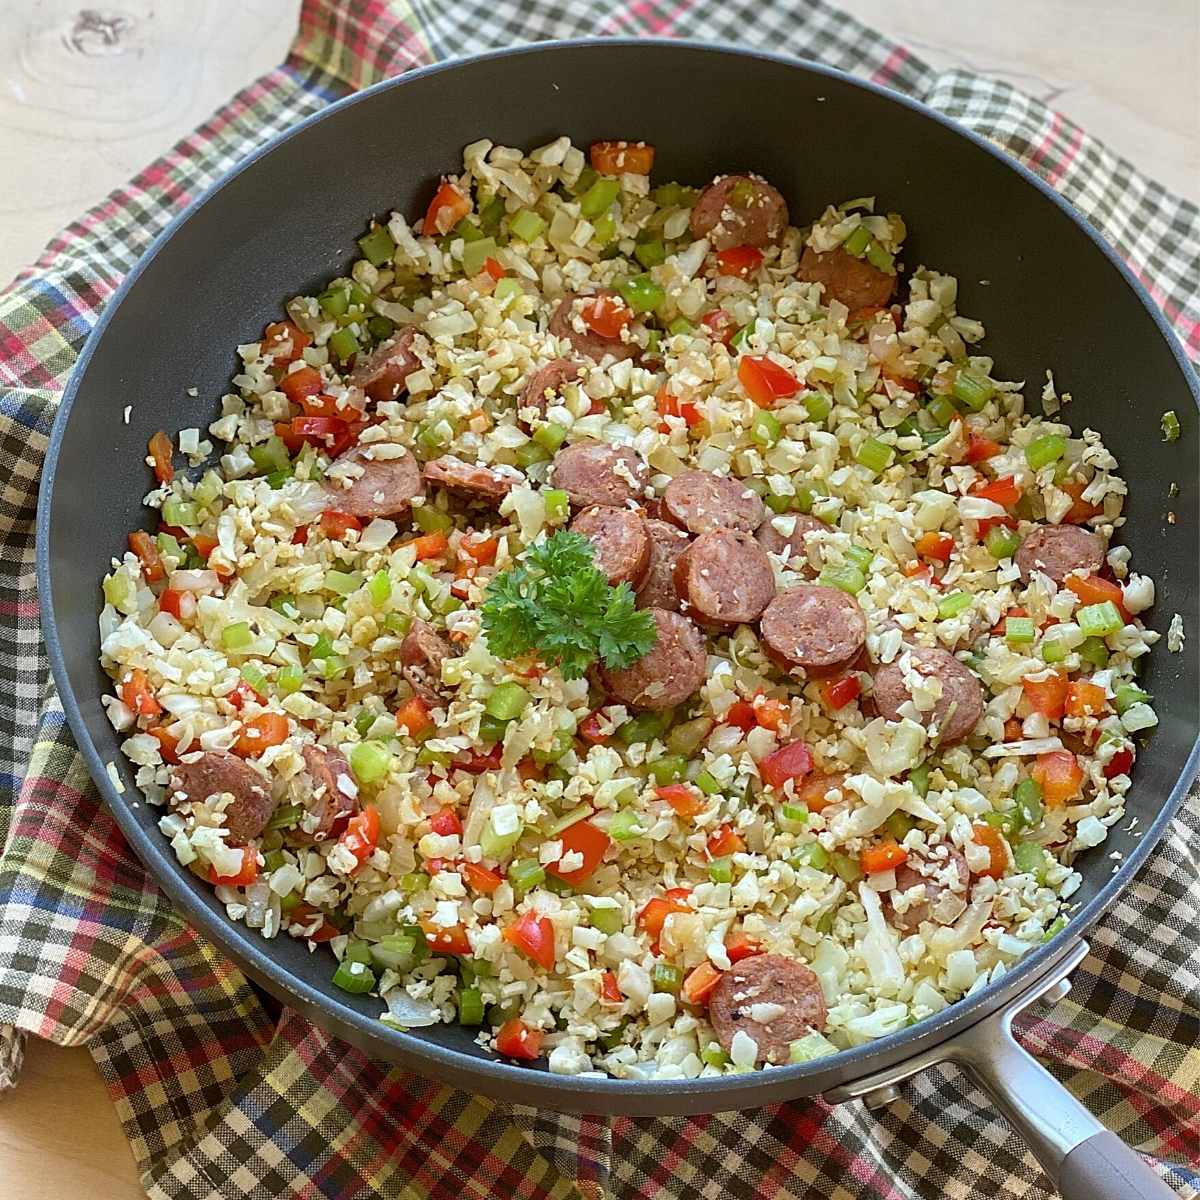 Skillet with Cajun cauliflower rice topped with sausage and garnished with parsley.